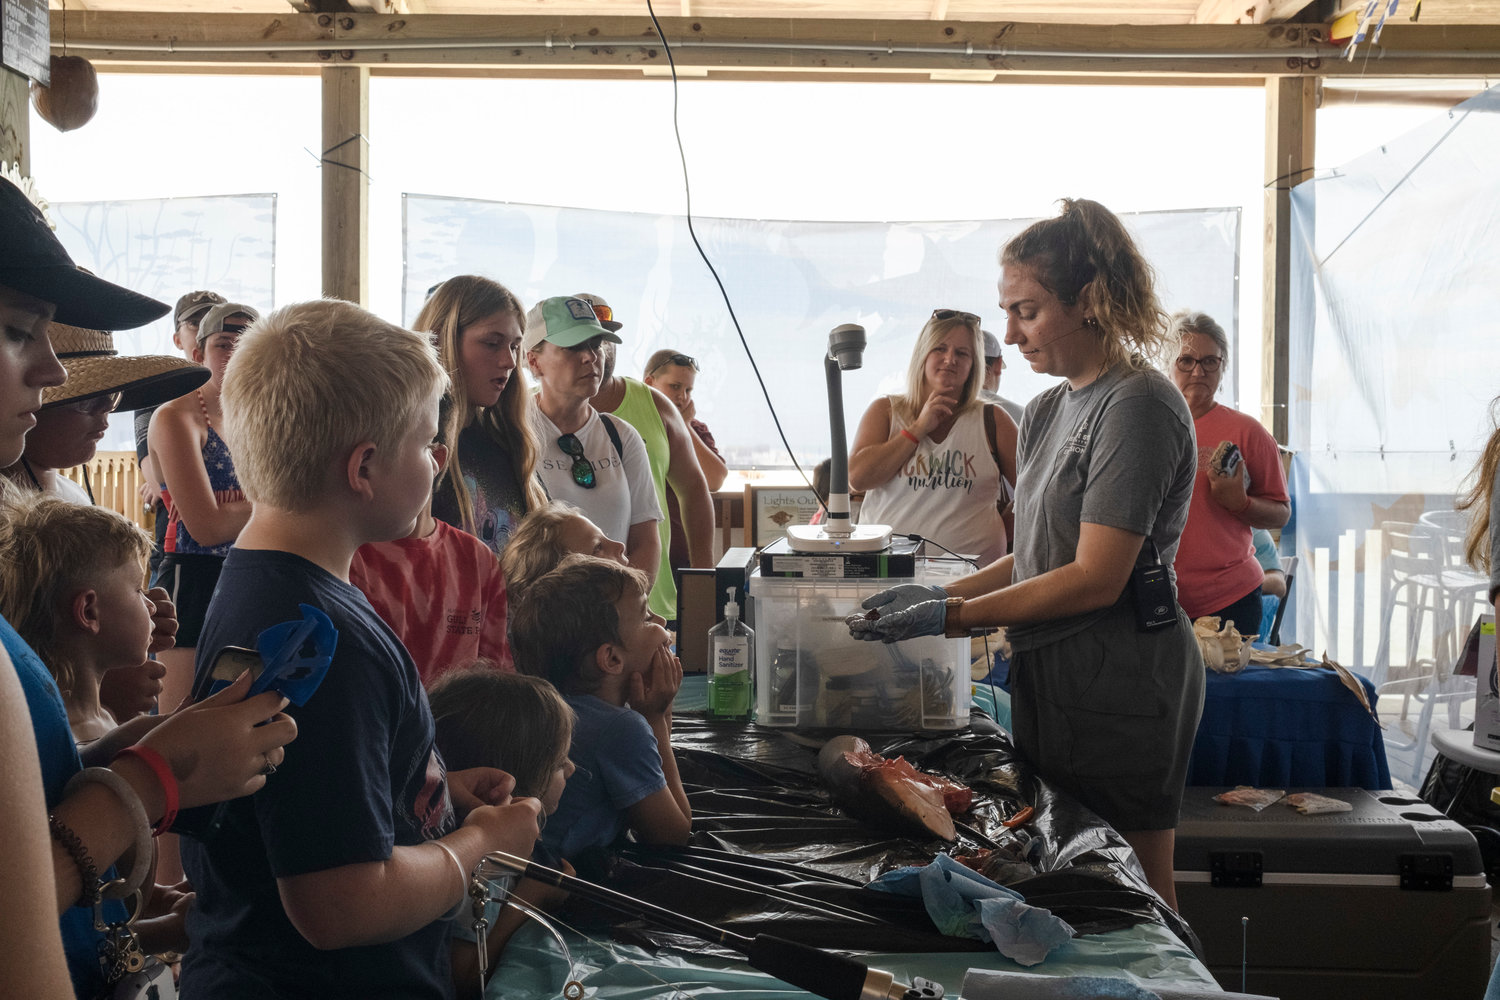 Alena Anderson, a researcher with the Mississippi State University Marine Fisheries Ecology, shows organs of blacknose shark specimen during a dissection for a crowd at Gulf State Park Pier as a part of the state park’s Shark Week. The blacknose shark is one of the most common sharks found on the Alabama Gulf Coast and can reach sizes up to five feet.